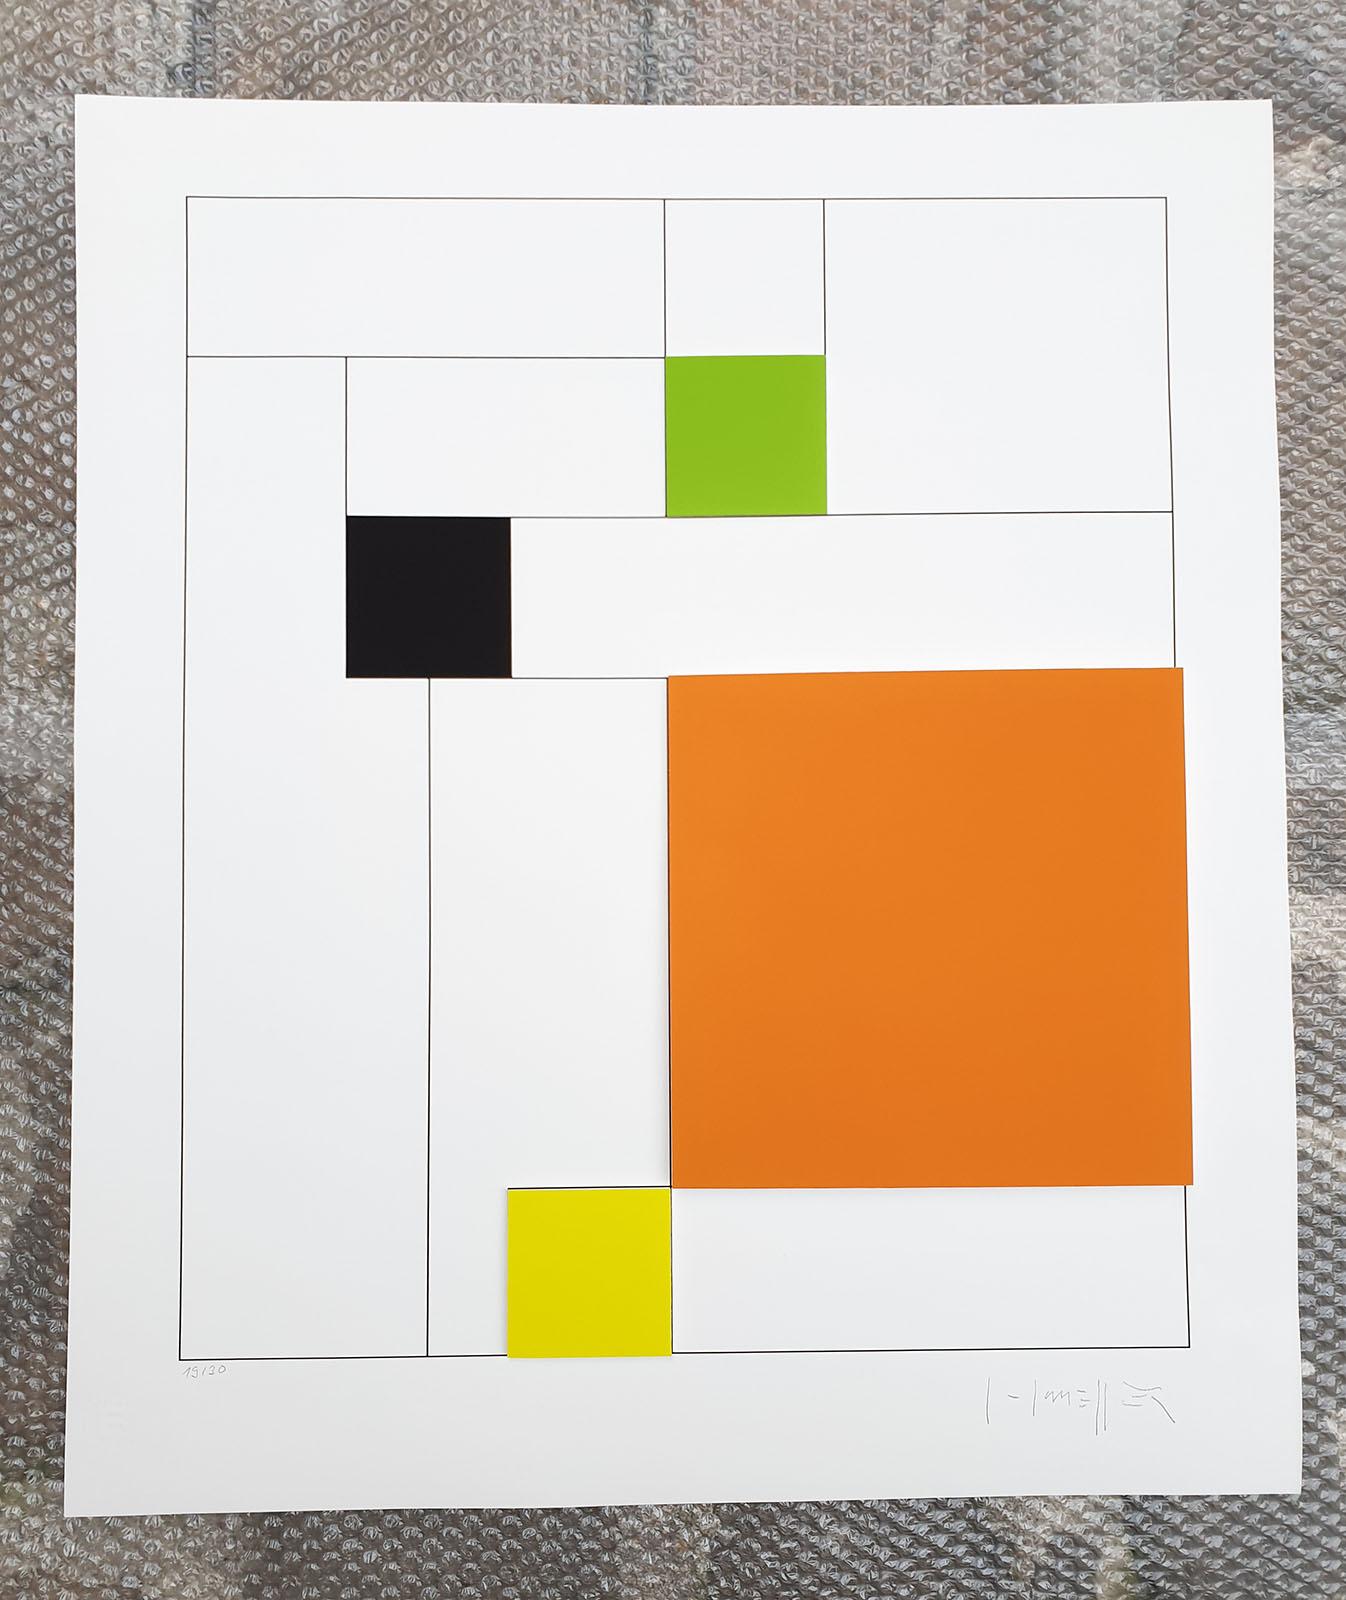 Gottfried Honegger
Composition 4 3D squares (orange, green, black, yellow)
2015 
Silkscreen print signed in pencil and numbered on 30 copies by the artist.
Dry stamp of the publisher in the margin at the lower left corner.
Condition: excellent; the